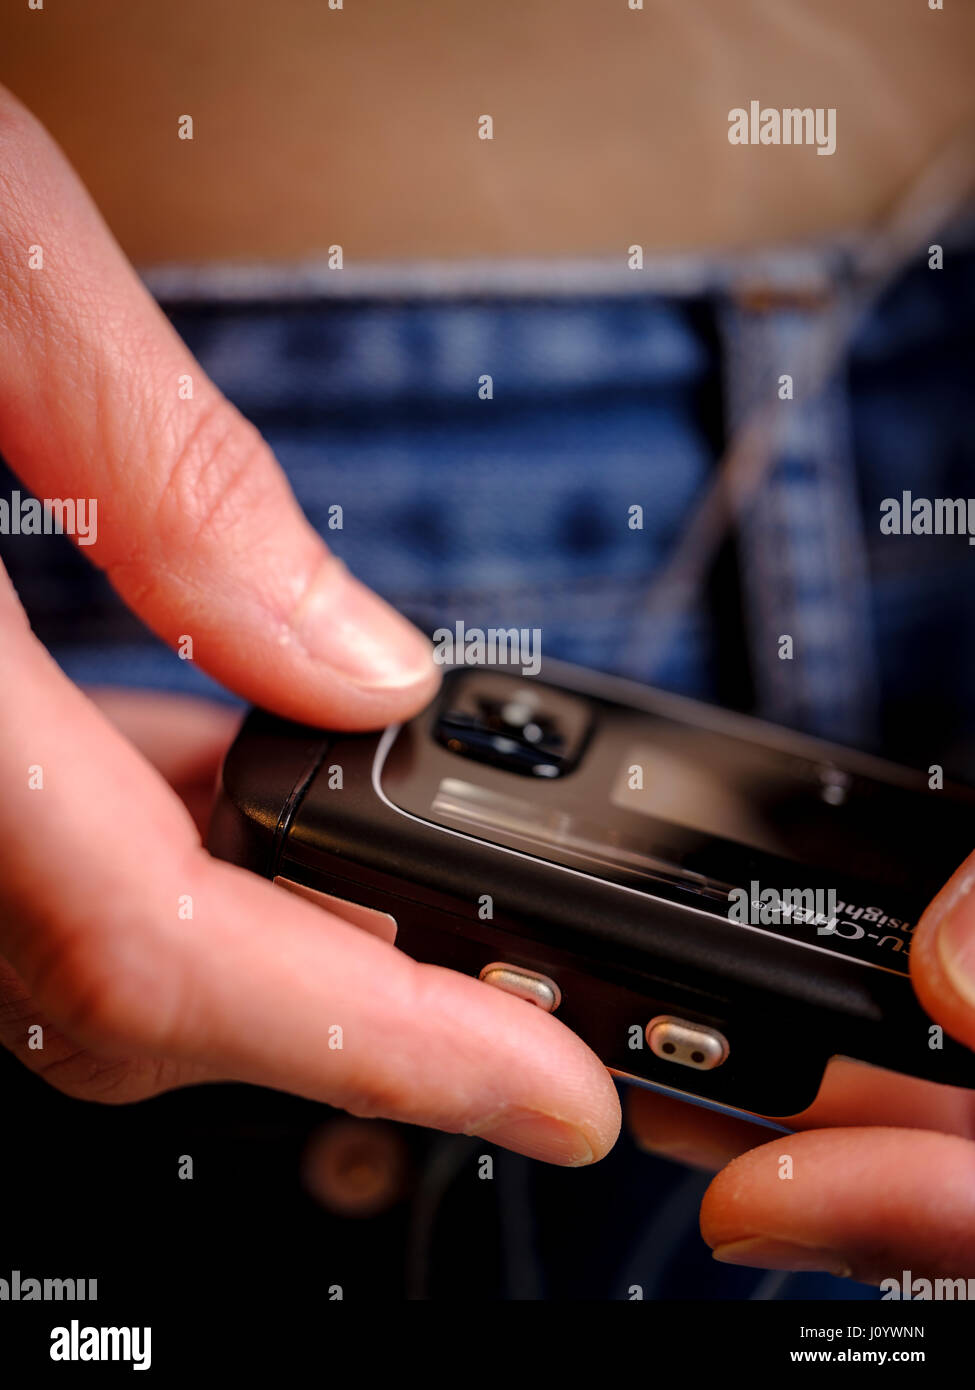 A woman with Type 1 diabetes using an insulin pump and continuous glucose monitor. Stock Photo